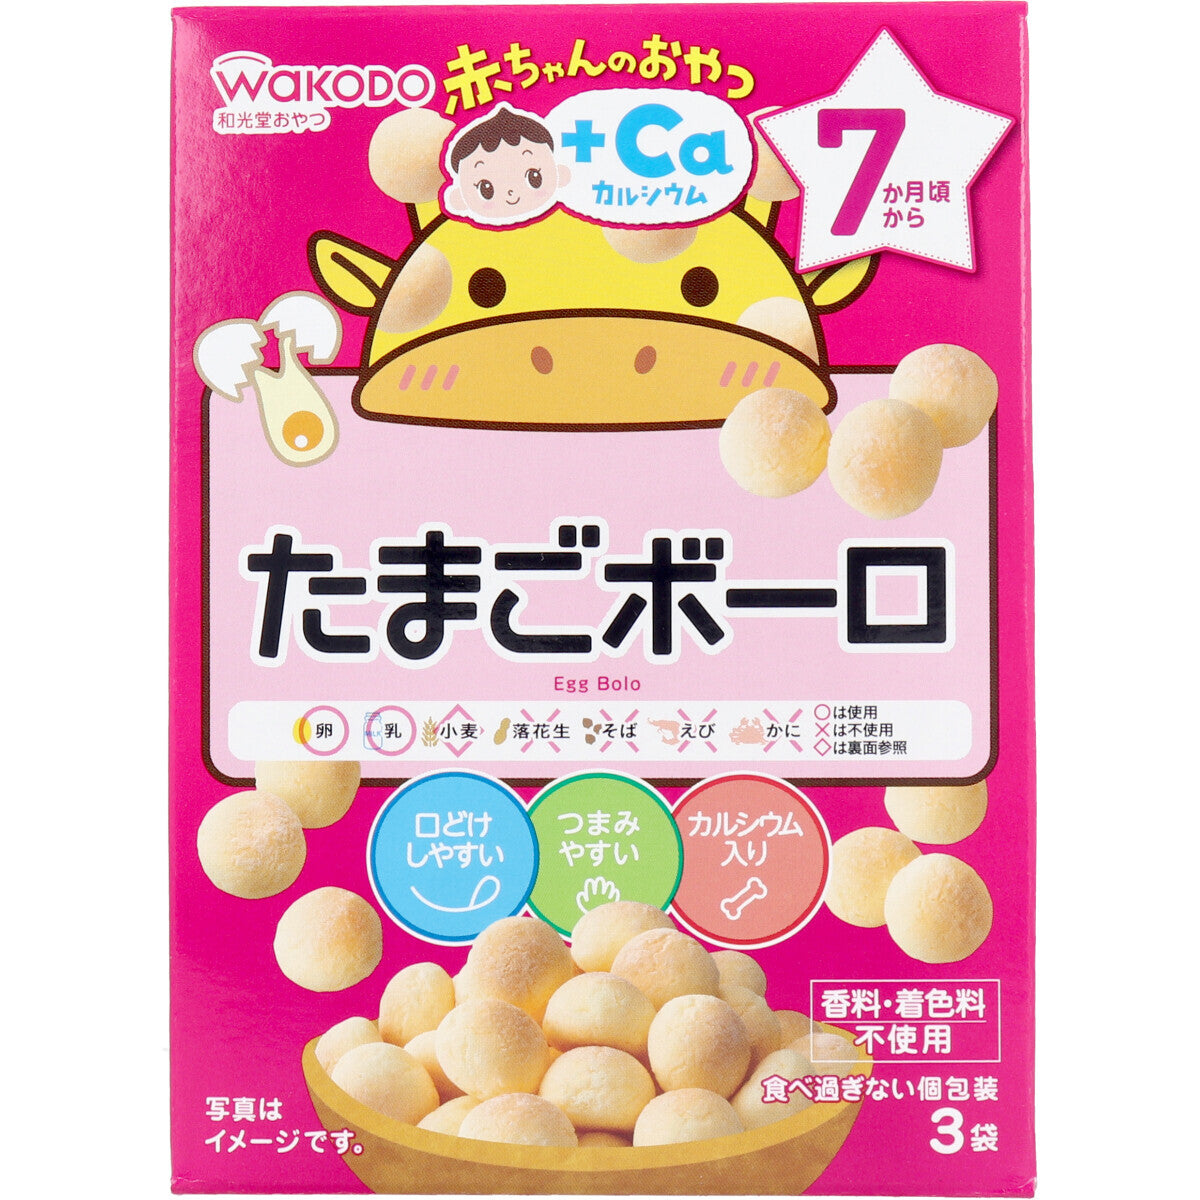 Wakodo - Baby Snack + Ca Egg Bolo Biscuits 15g x 3 bags